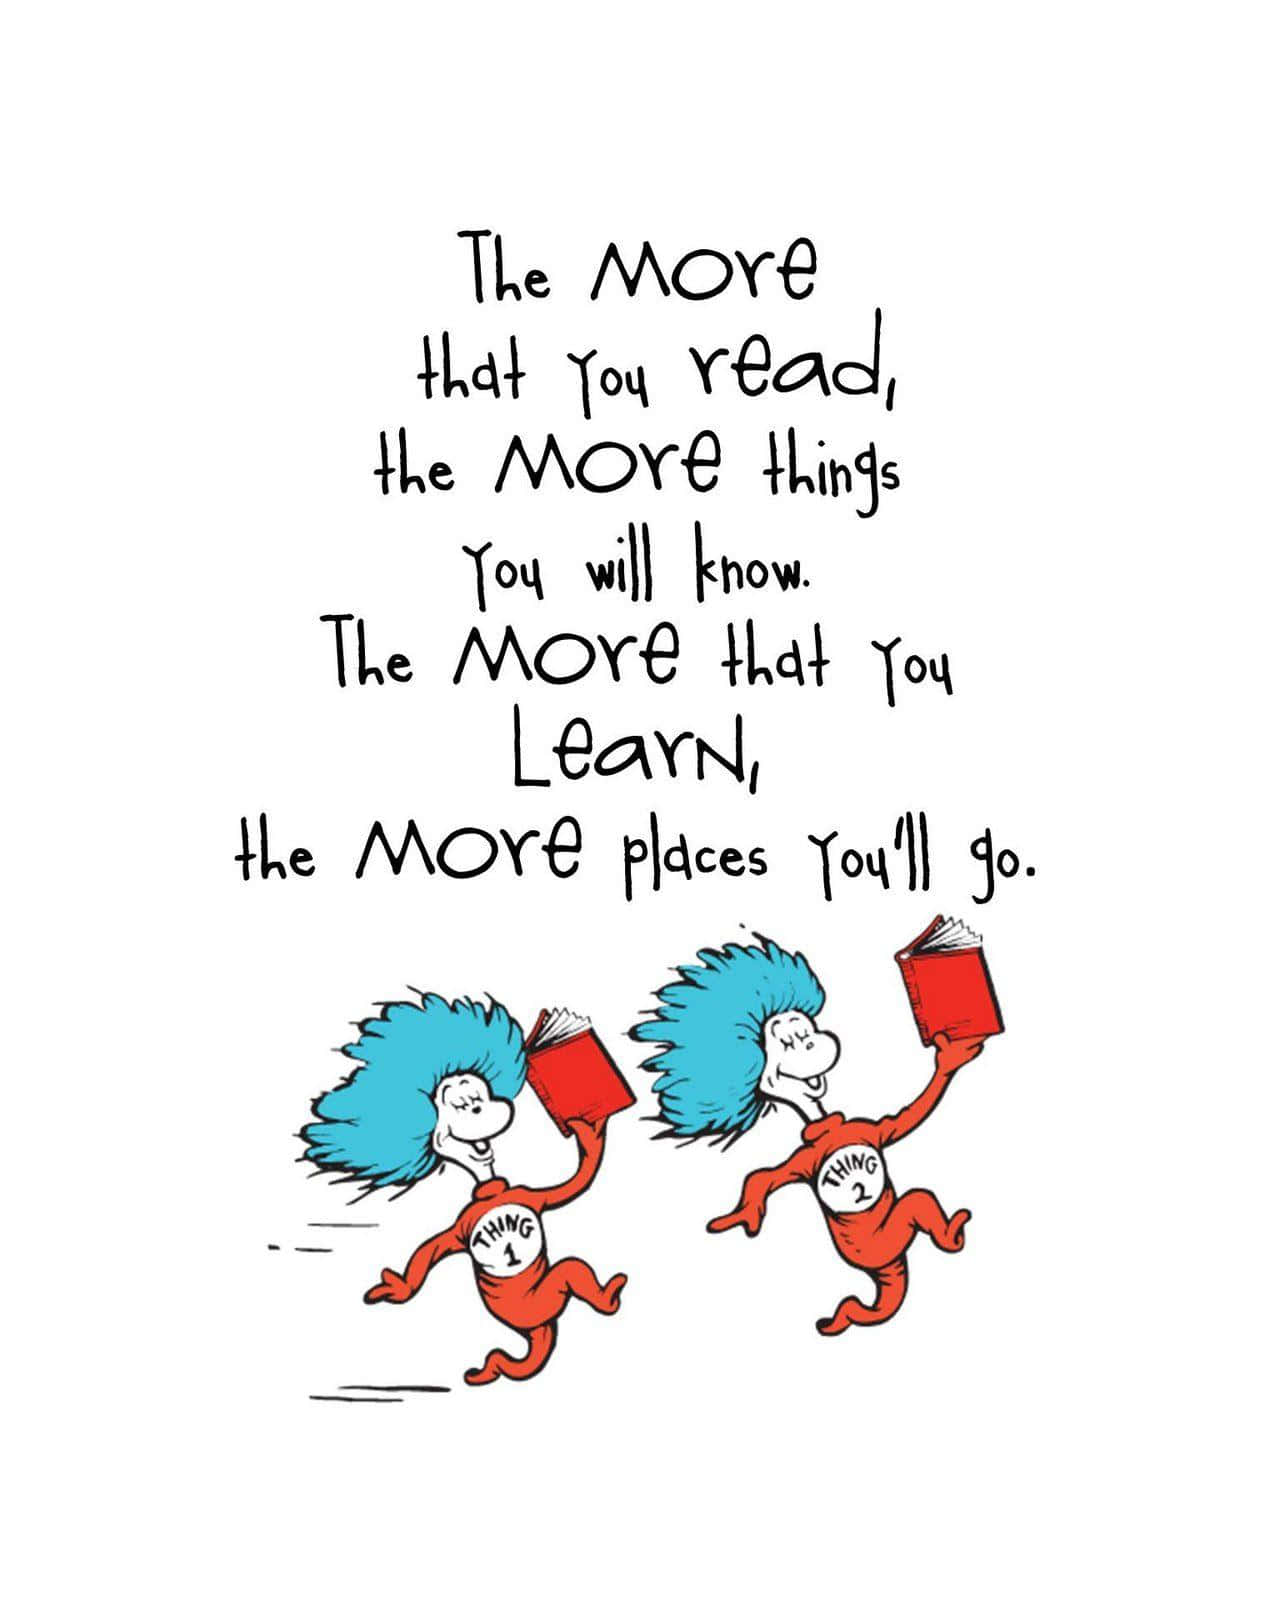 Dr Seuss Quote - The More You Learn The More Places You Go Wallpaper